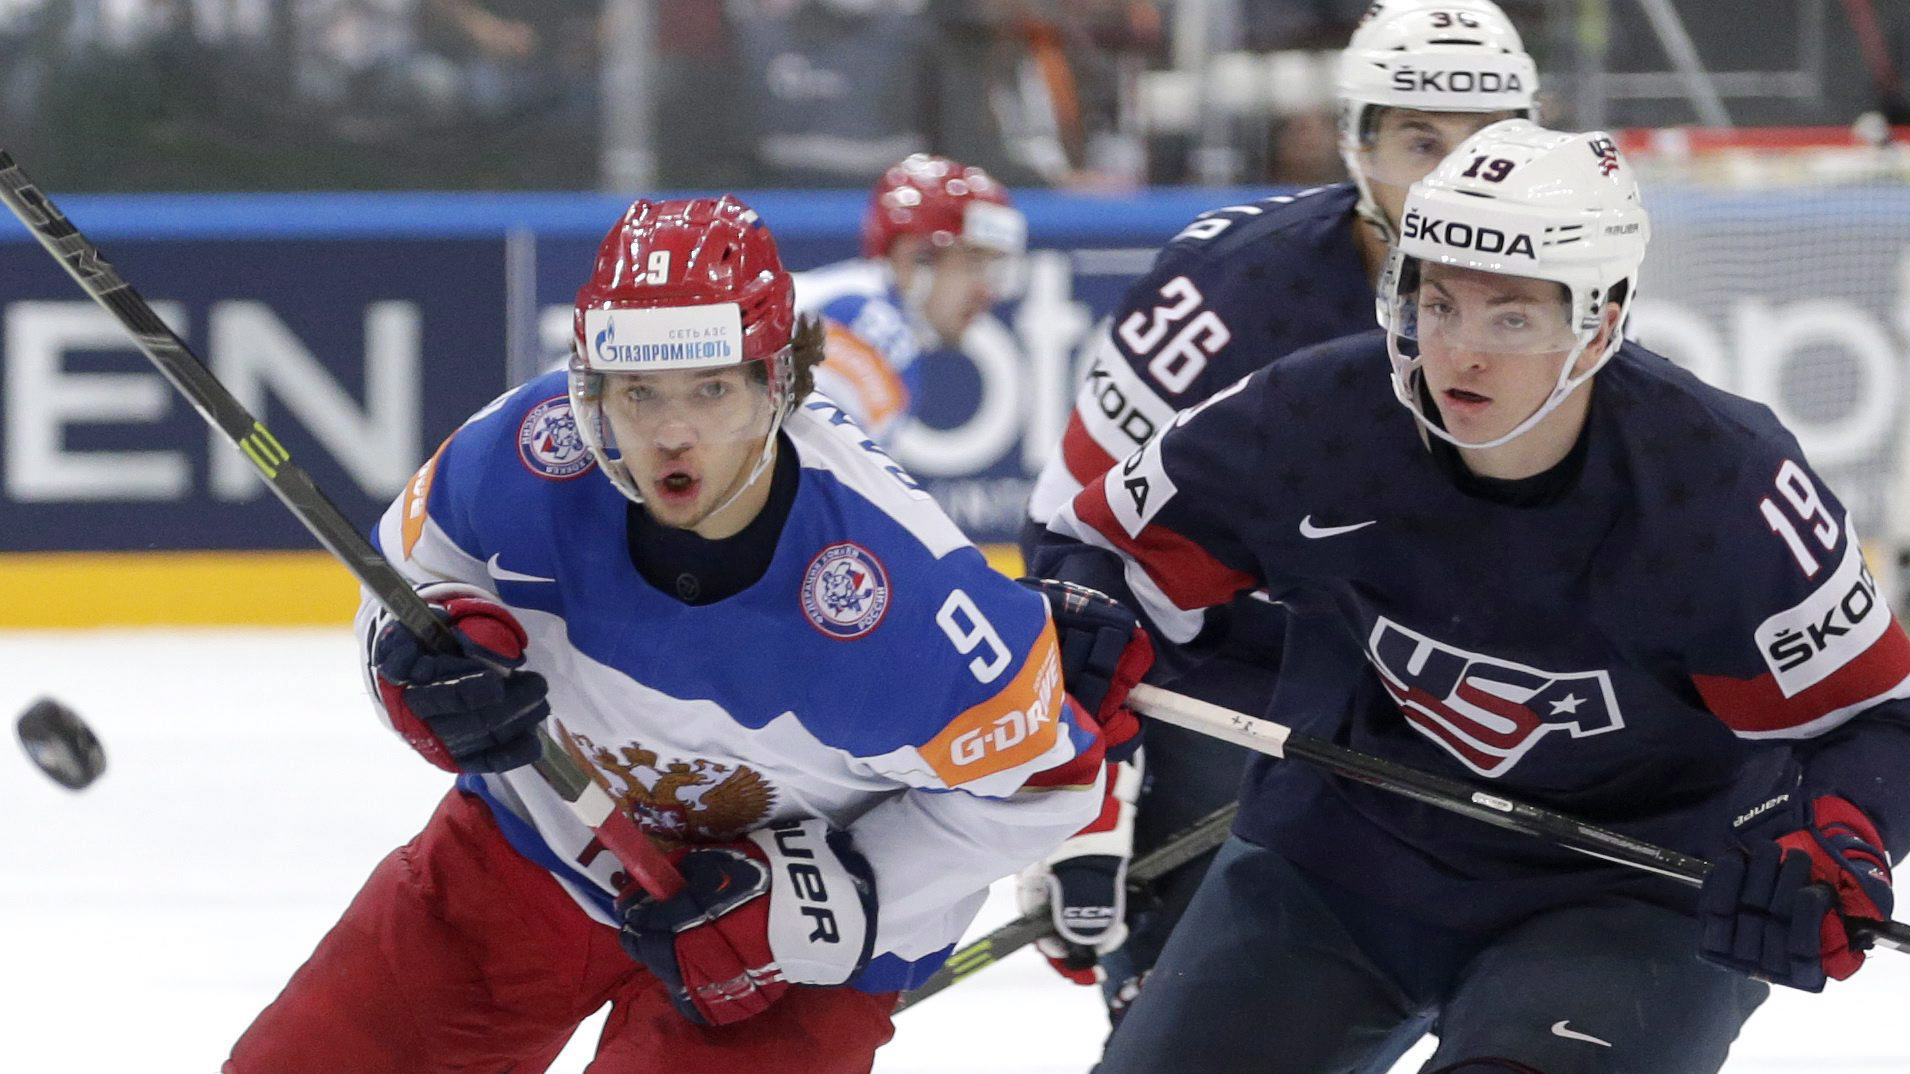 Russia’s Artemi Panarin, left, follows a puck with Jimmy Vesey, of the United States, right, during the Hockey World Championships semifinal match in Prague, Czech Republic. (Petr David Josek/AP) 